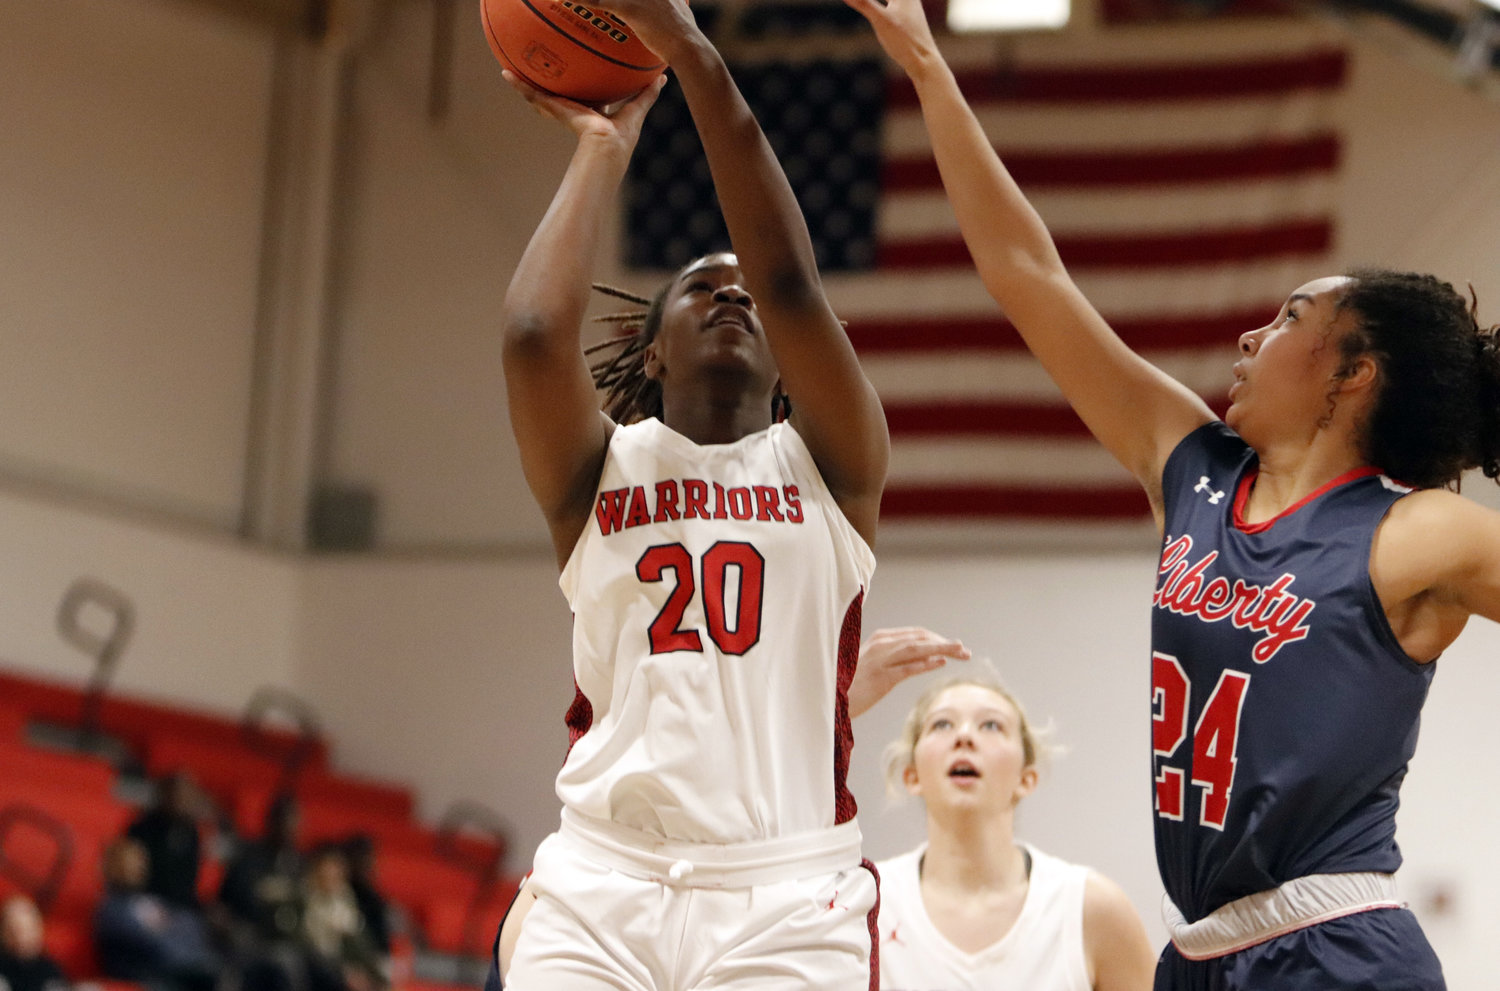 Warrenton junior Neveah Hill scores two of her team-high 14 points in Monday’s win over Liberty.